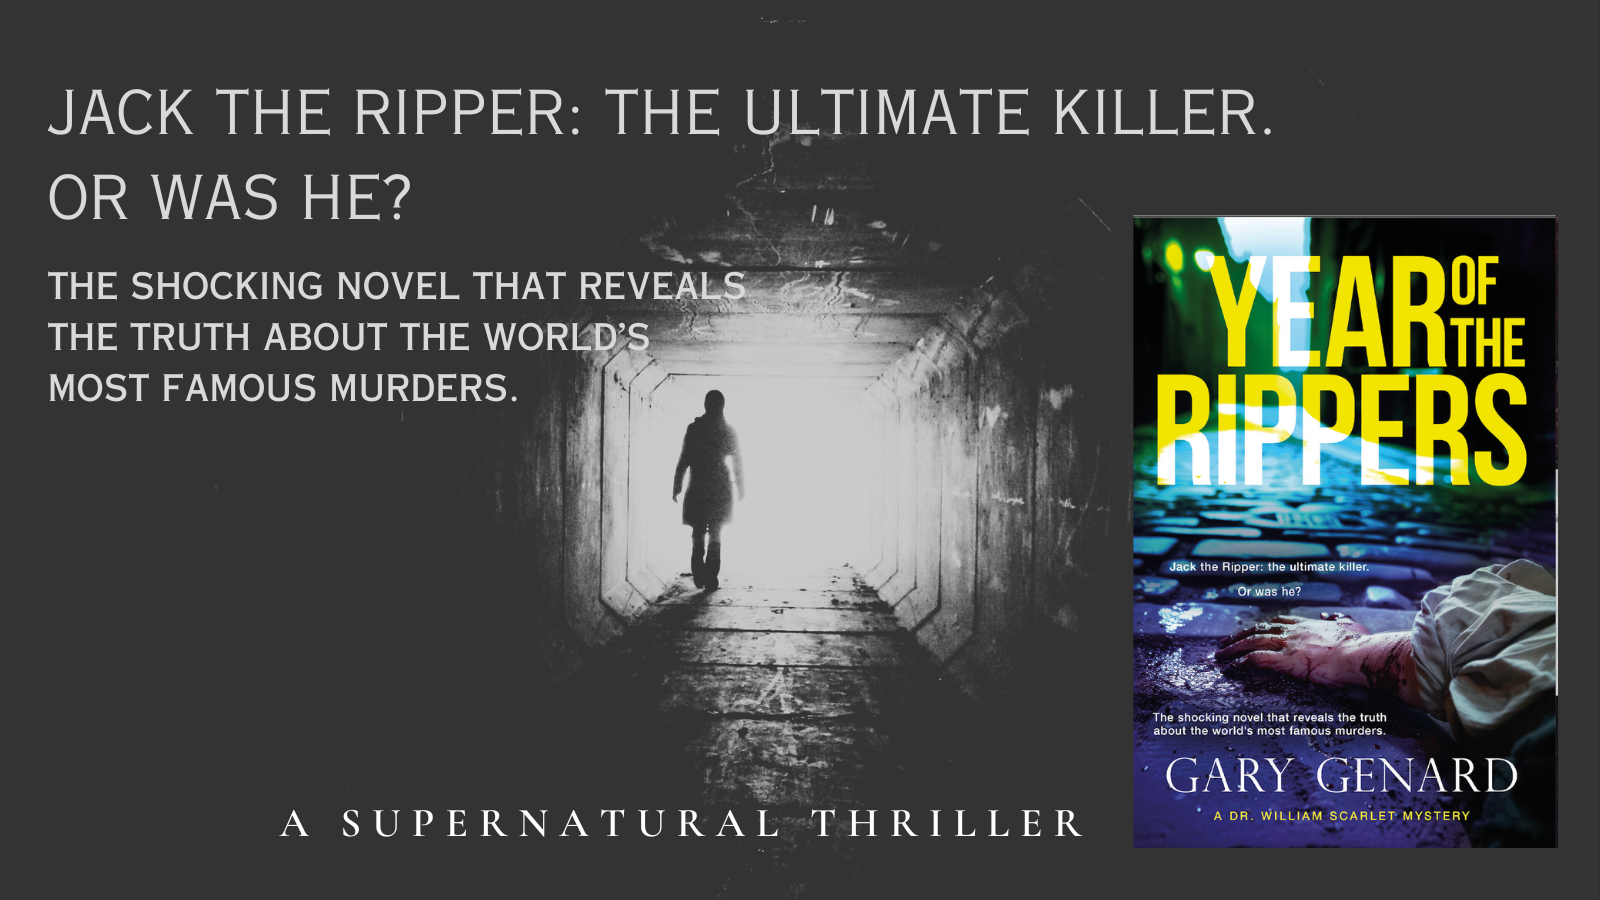 Year of the Rippers: A Supernatural Thriller, a Dr. William Scarlet Mystery, by Gary Genard.